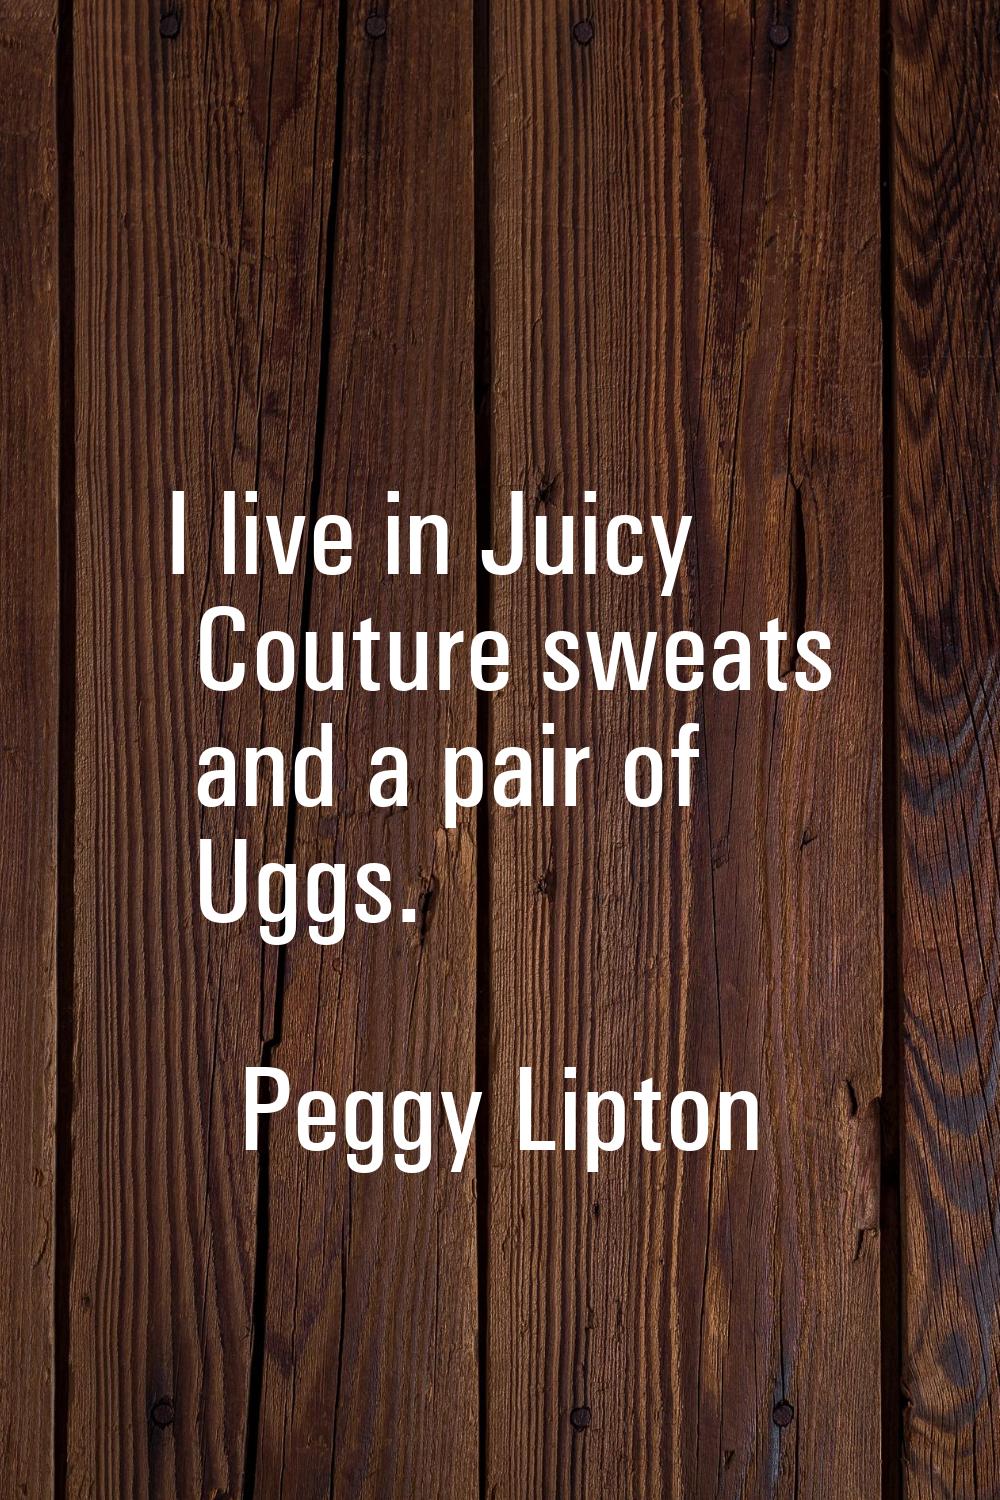 I live in Juicy Couture sweats and a pair of Uggs.